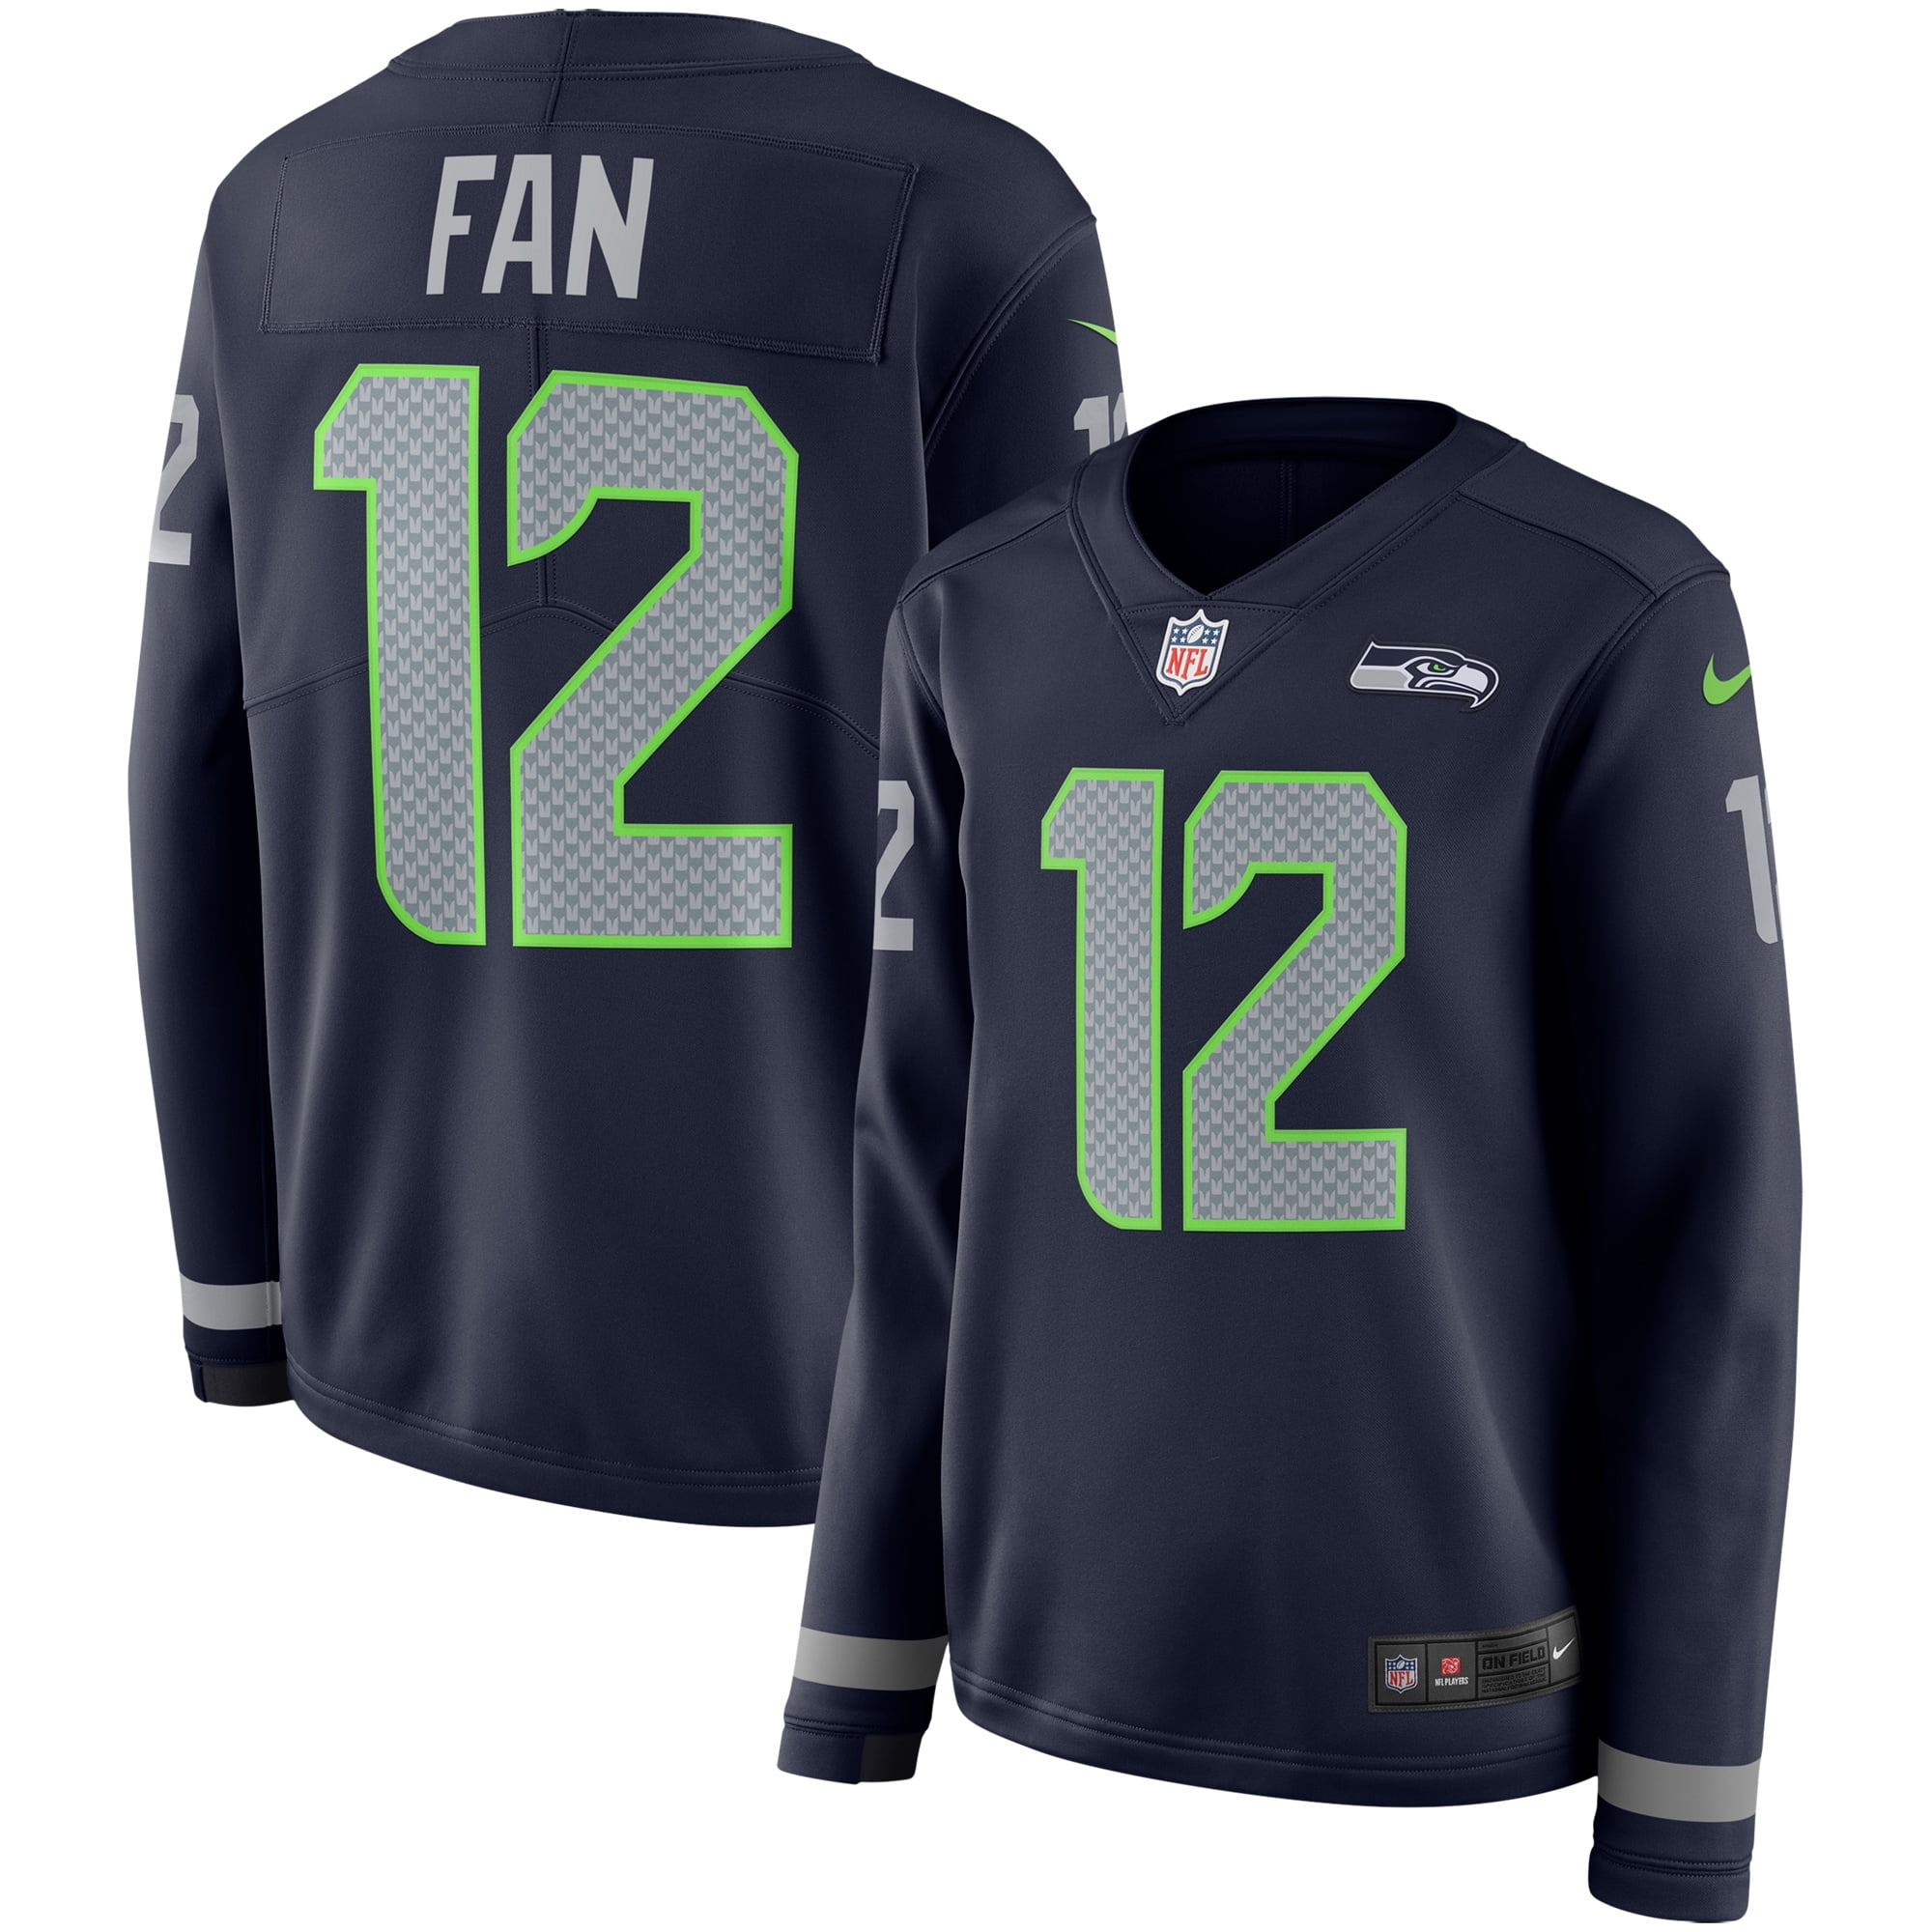 where to buy seahawks jersey